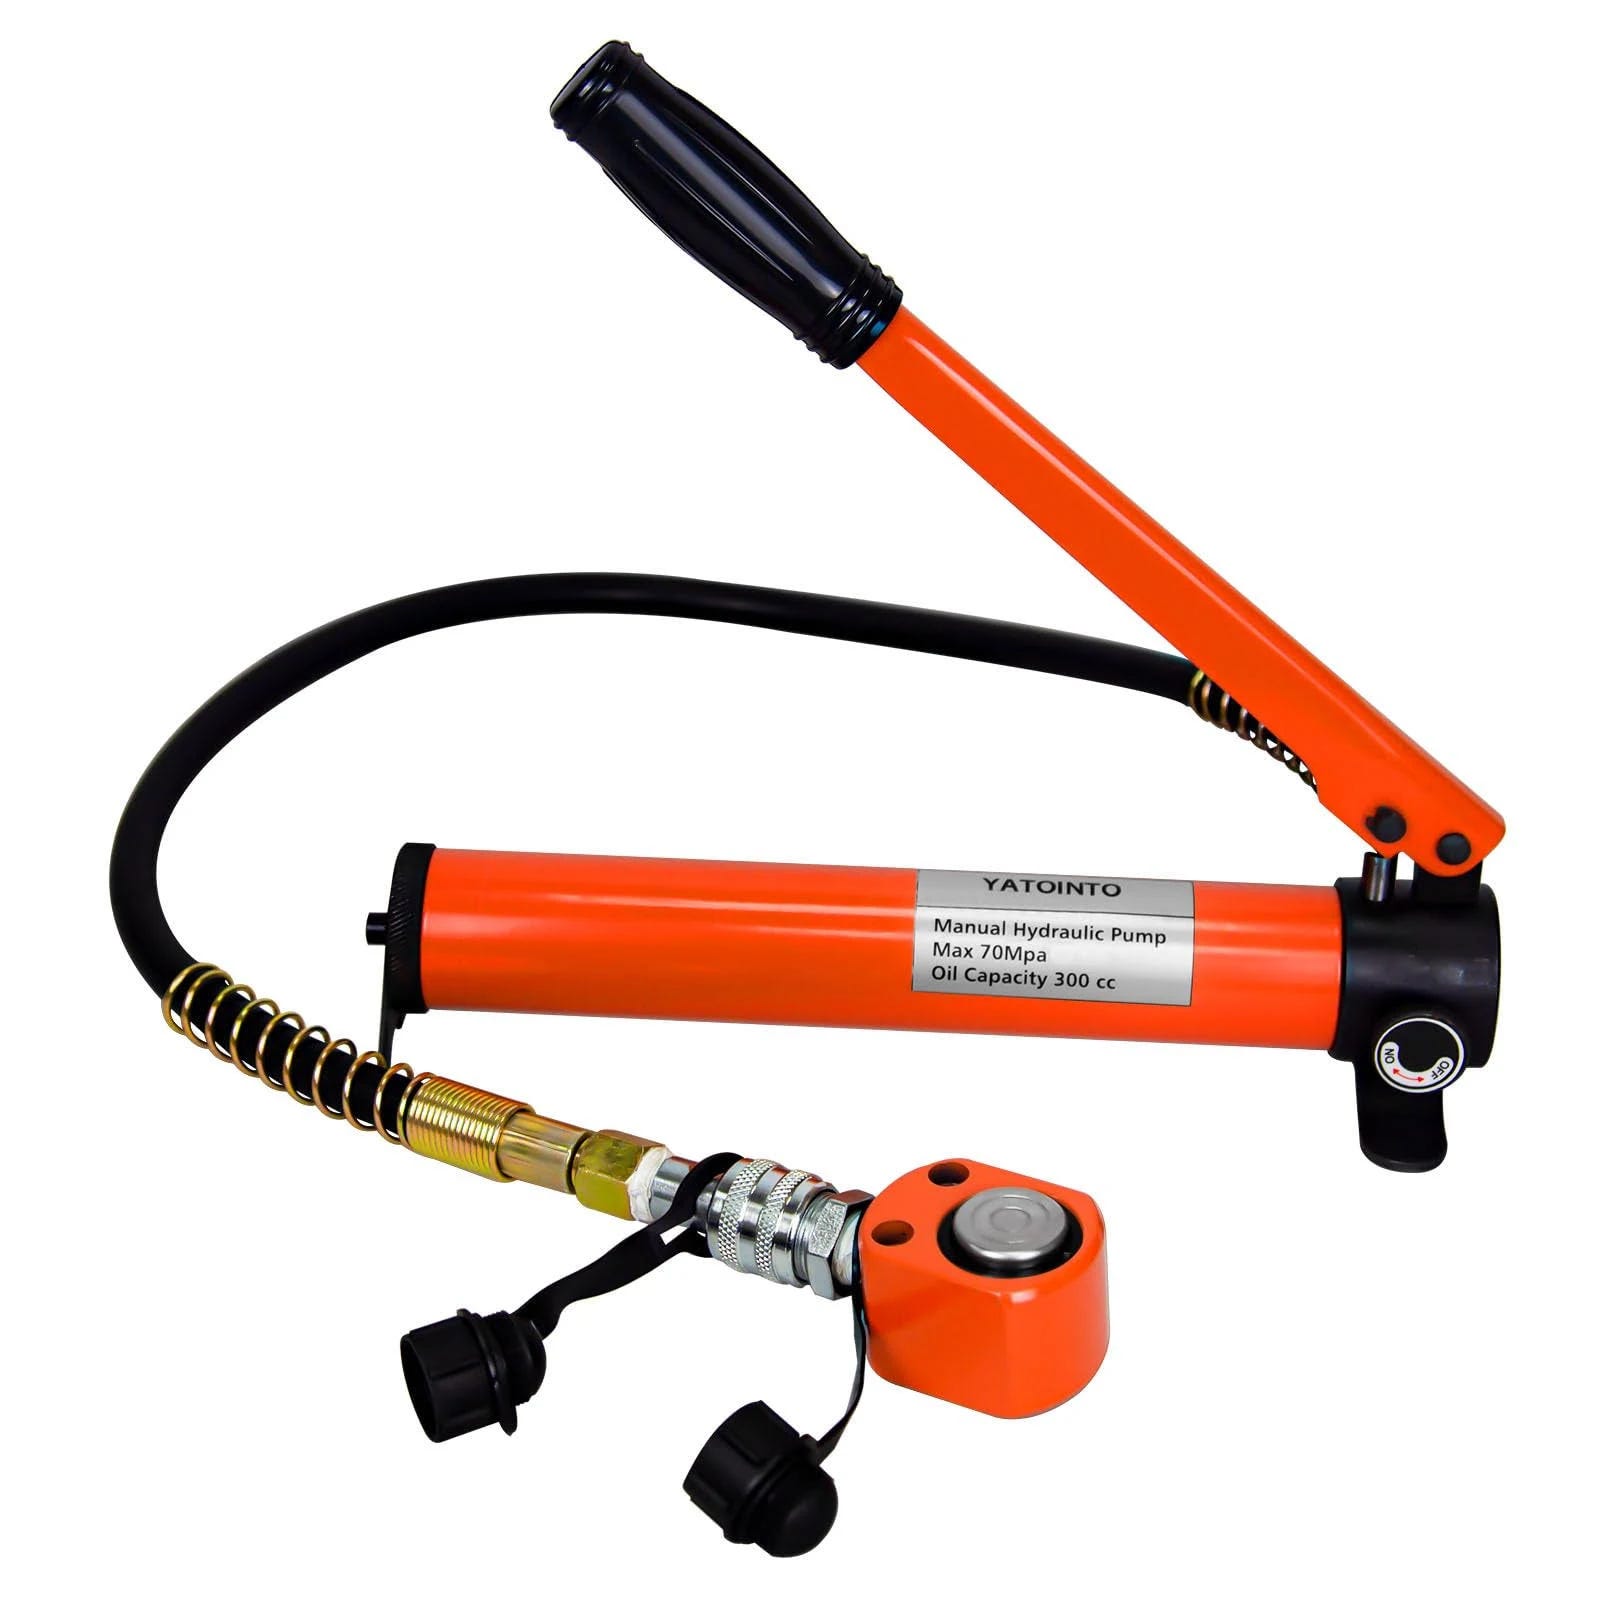 YATOINTO Porta Power 5-Ton Low Profile Multi-Section Hydraulic Jack Kit with Manual Pump | Image